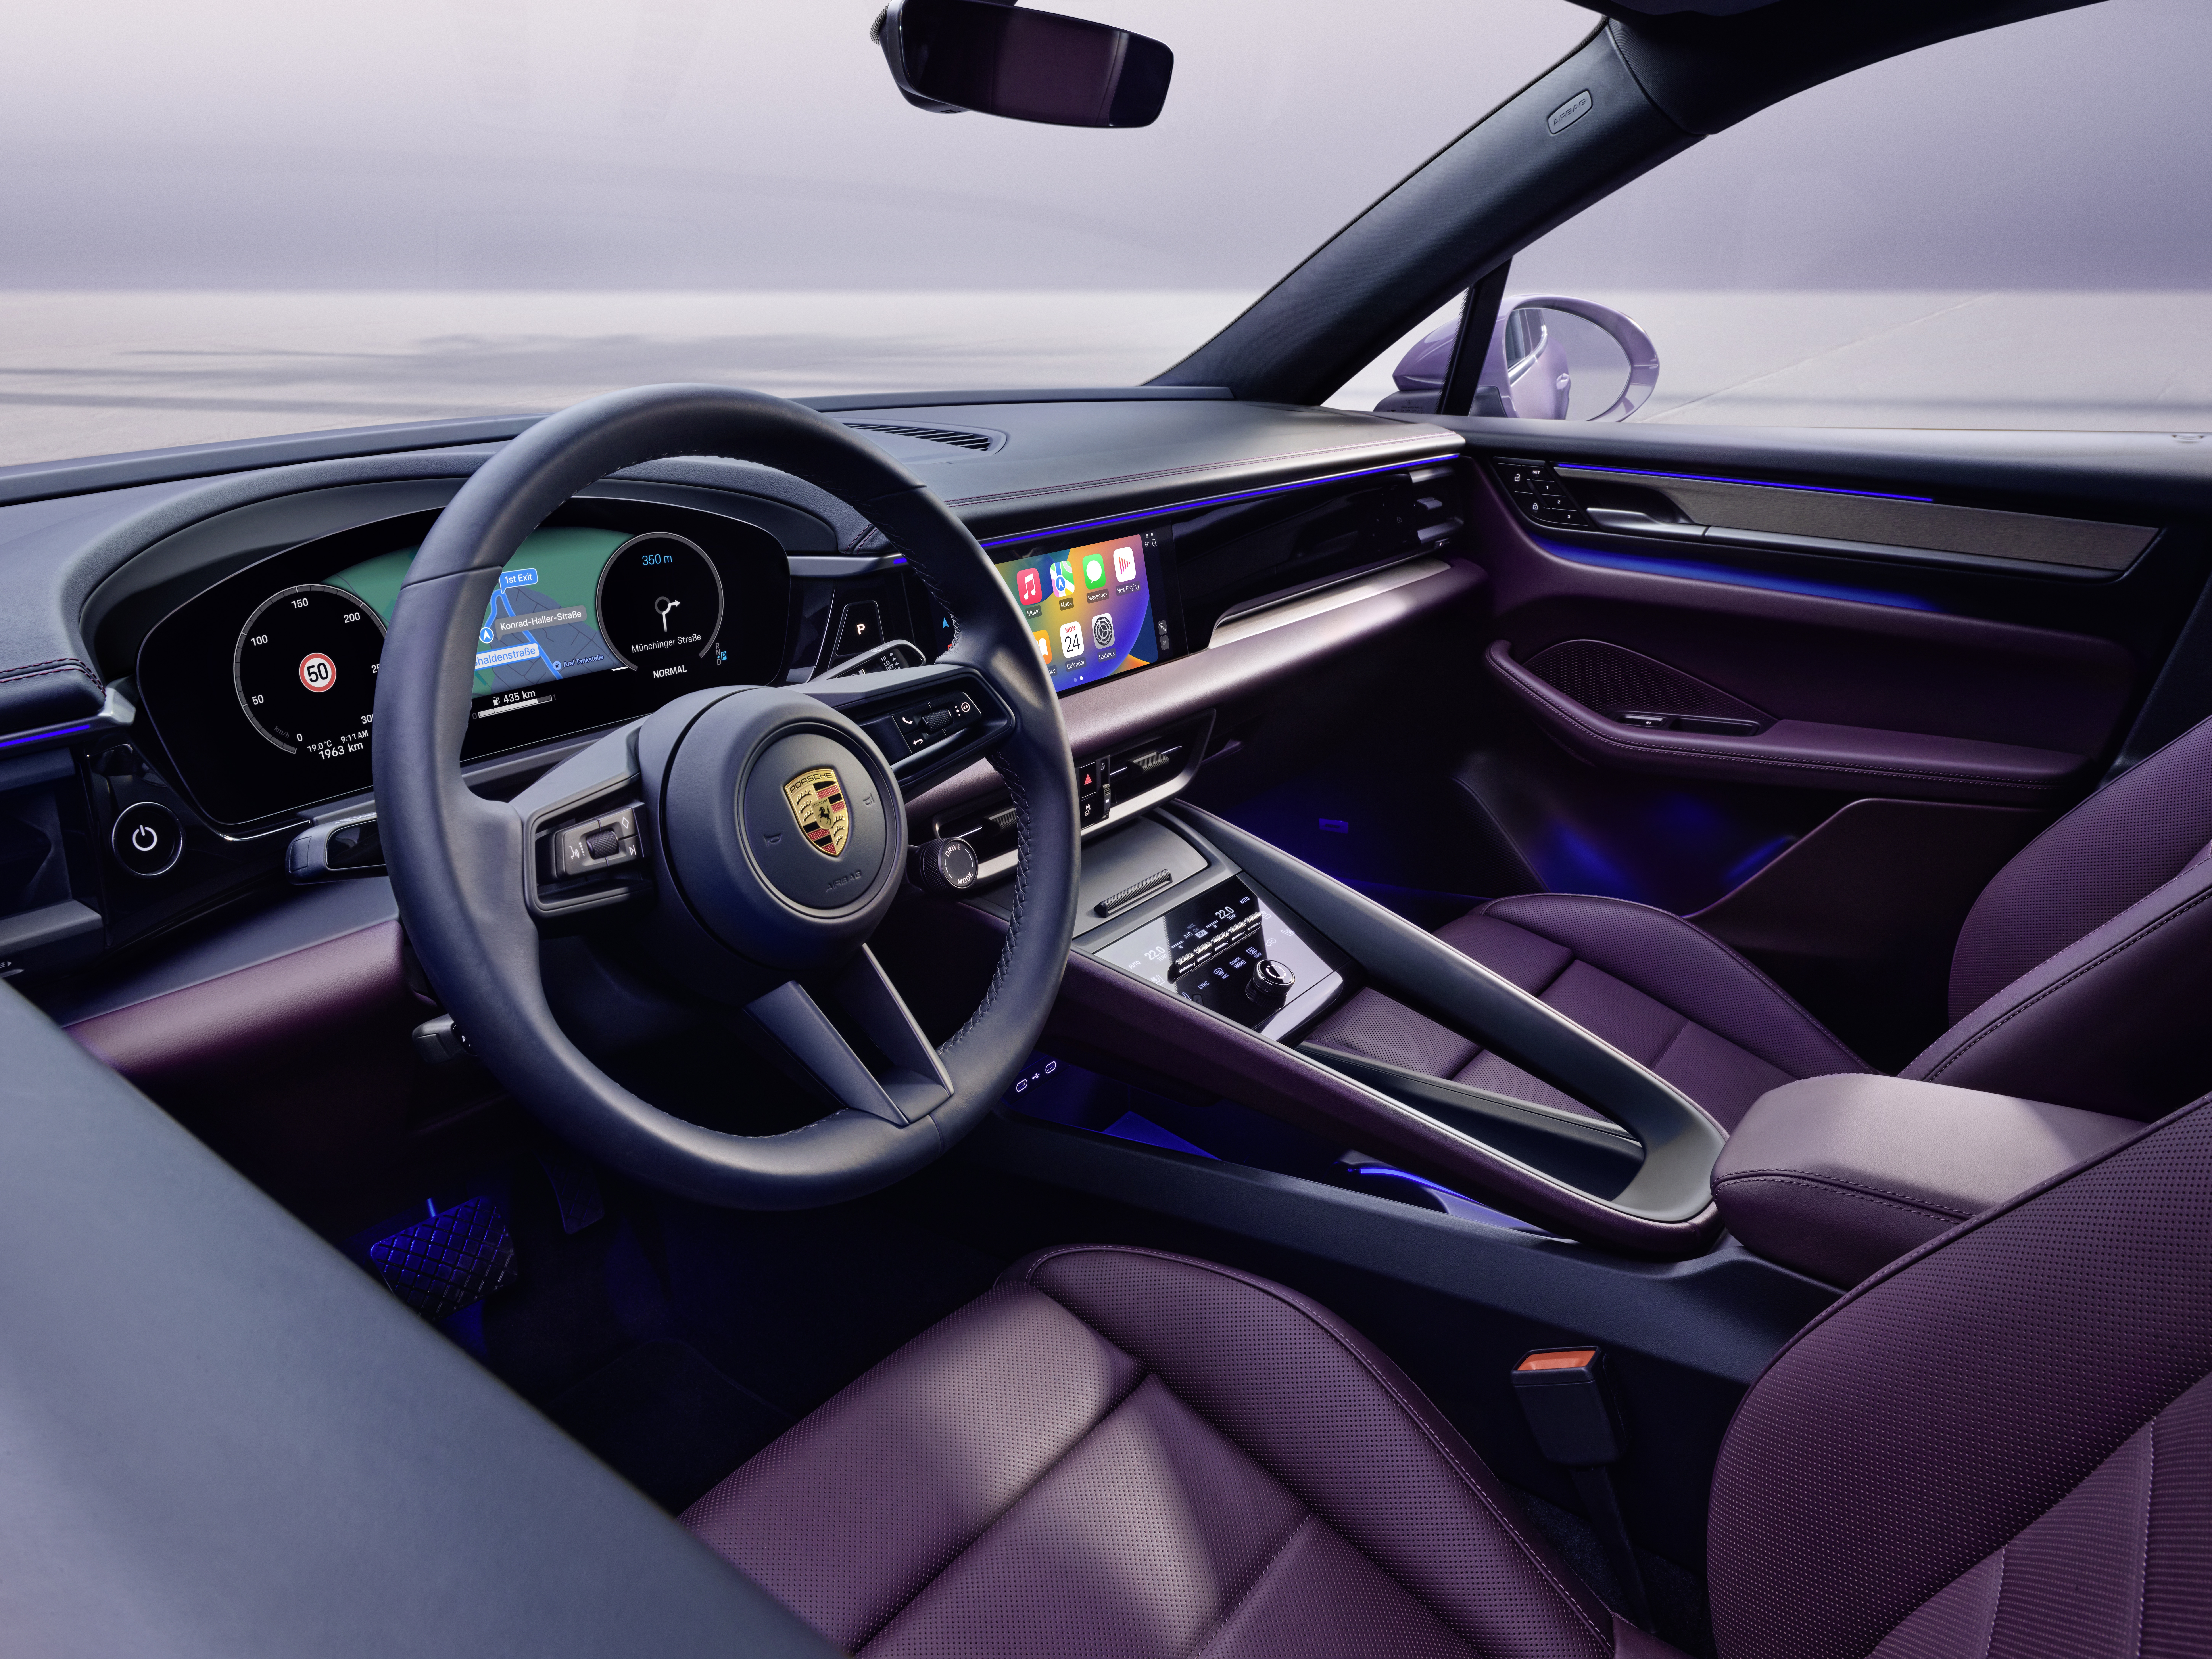 Interior of electric Porsche Macan showing electronic displays